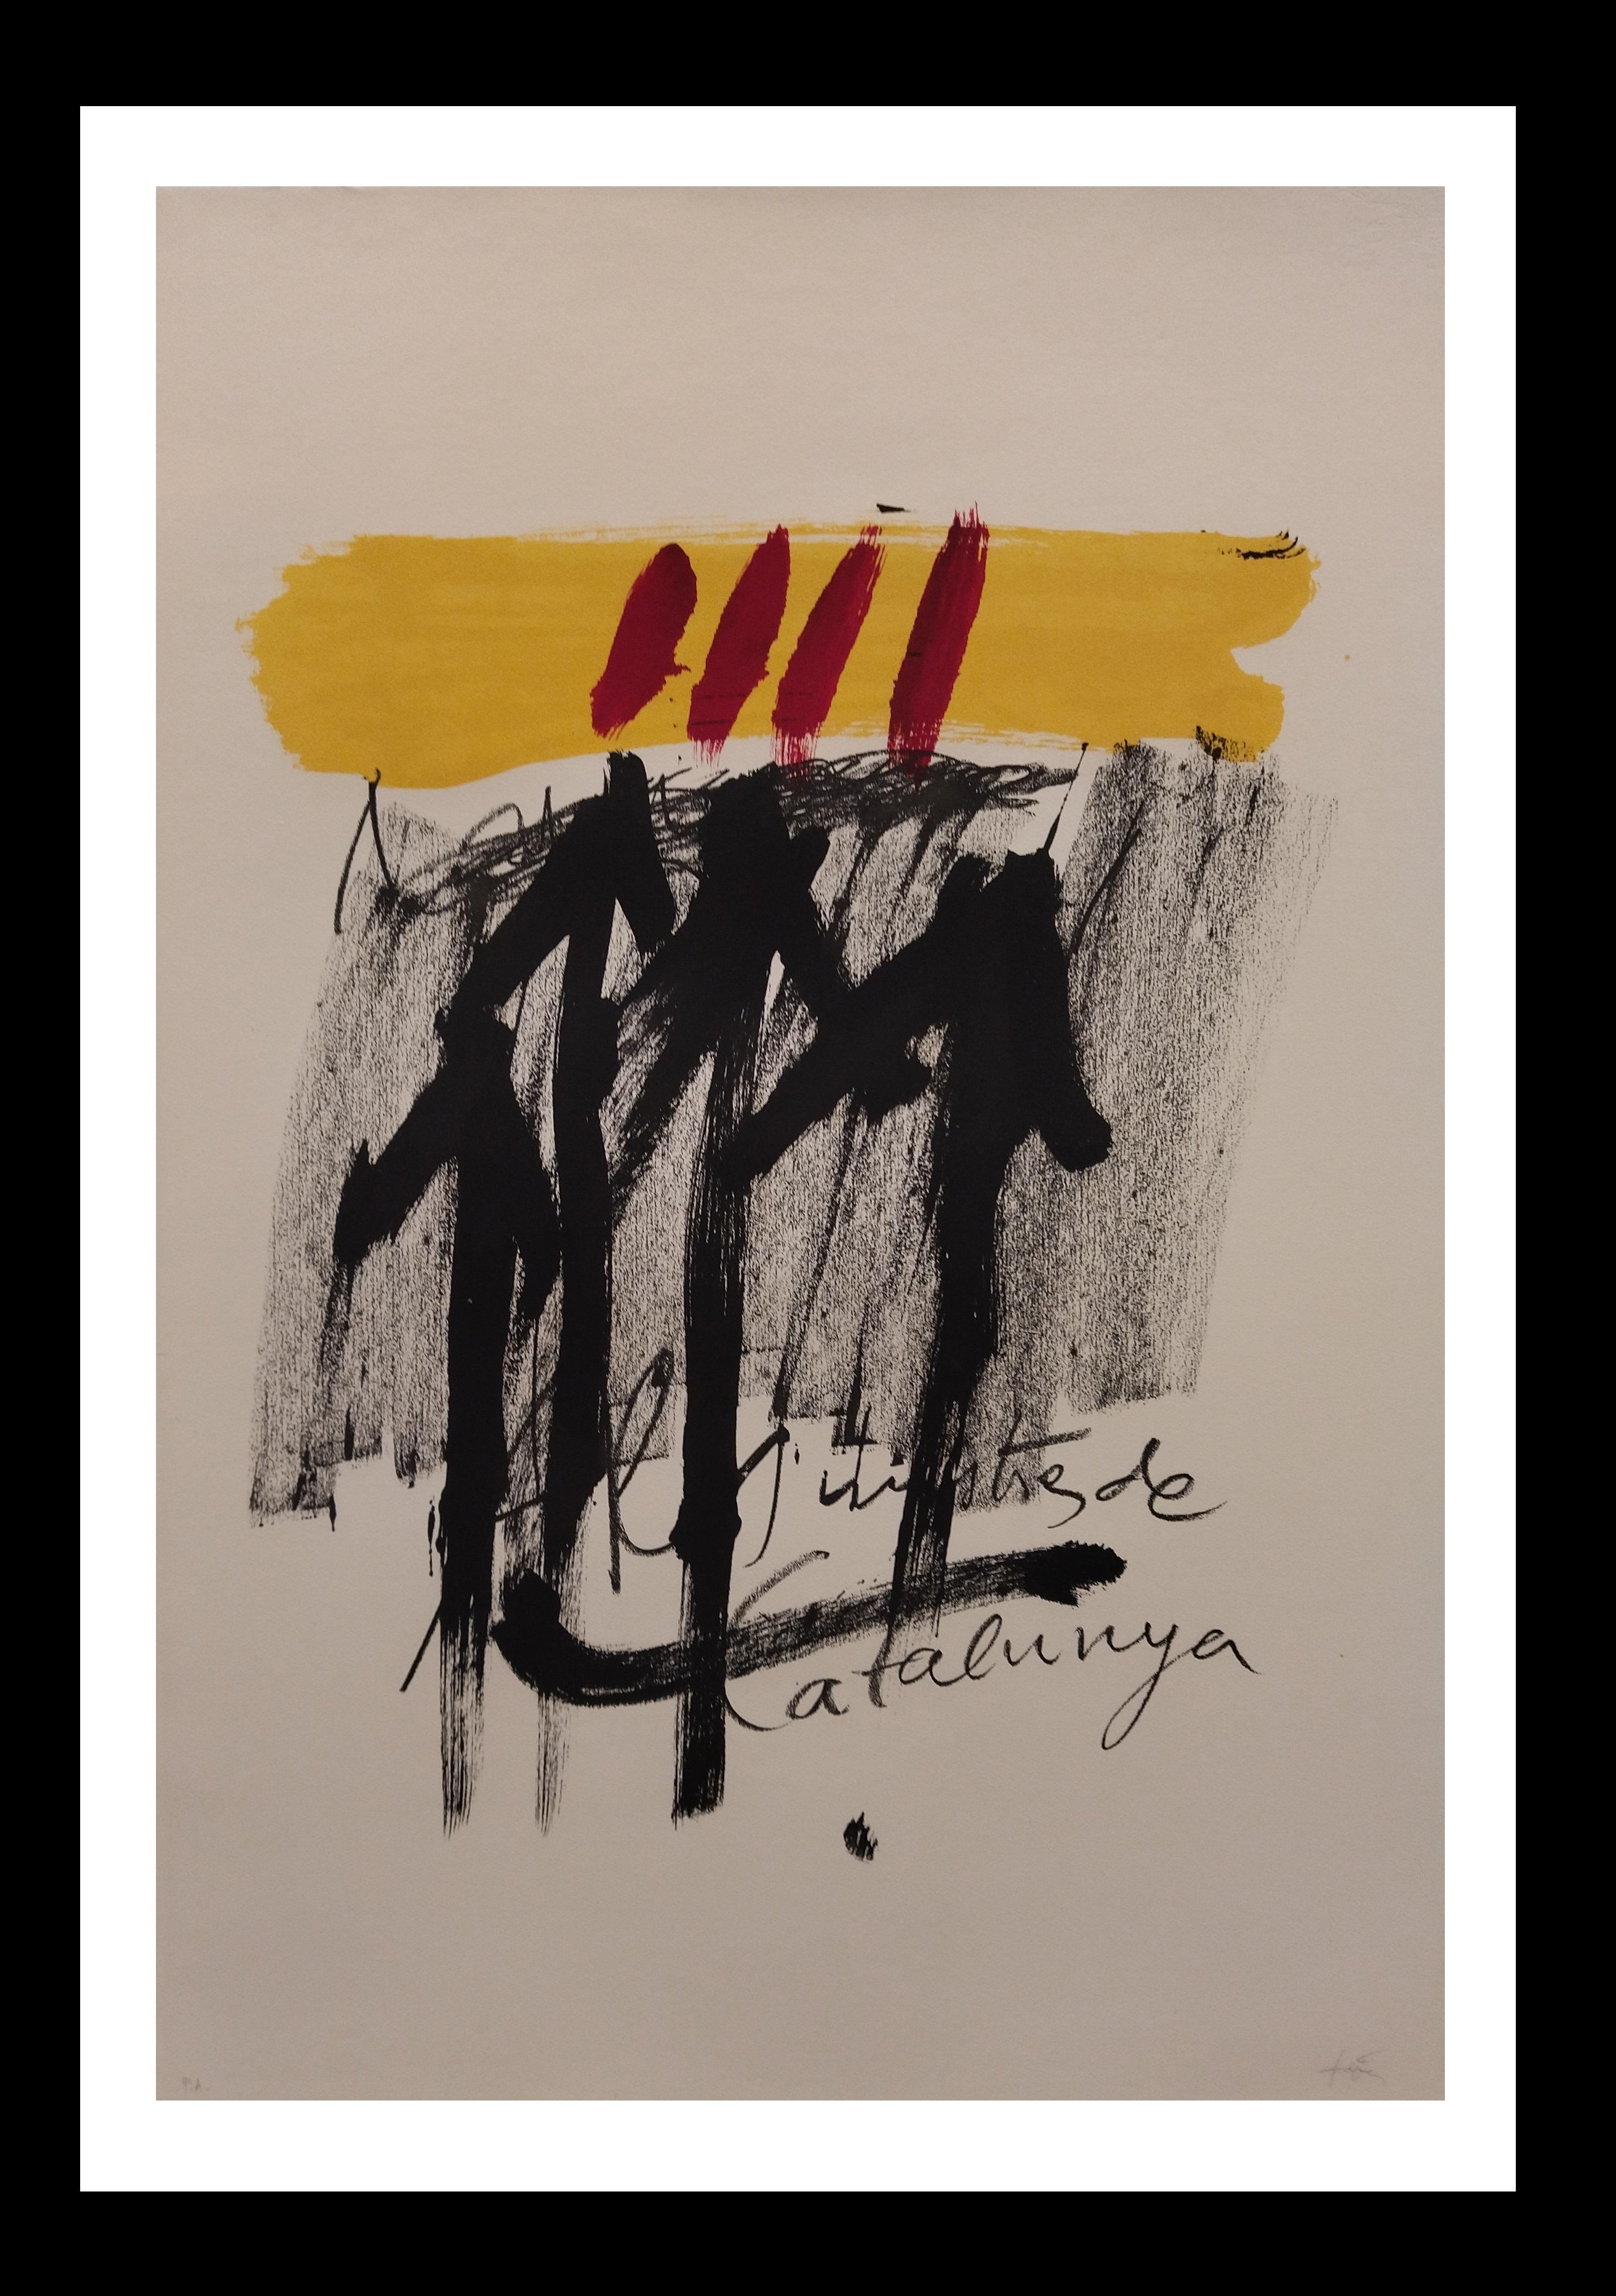 ANTONI TAPIES was the maximum representative of Spanish abstract art of the 20th century. His works are represented in museums and foundations around the world.
